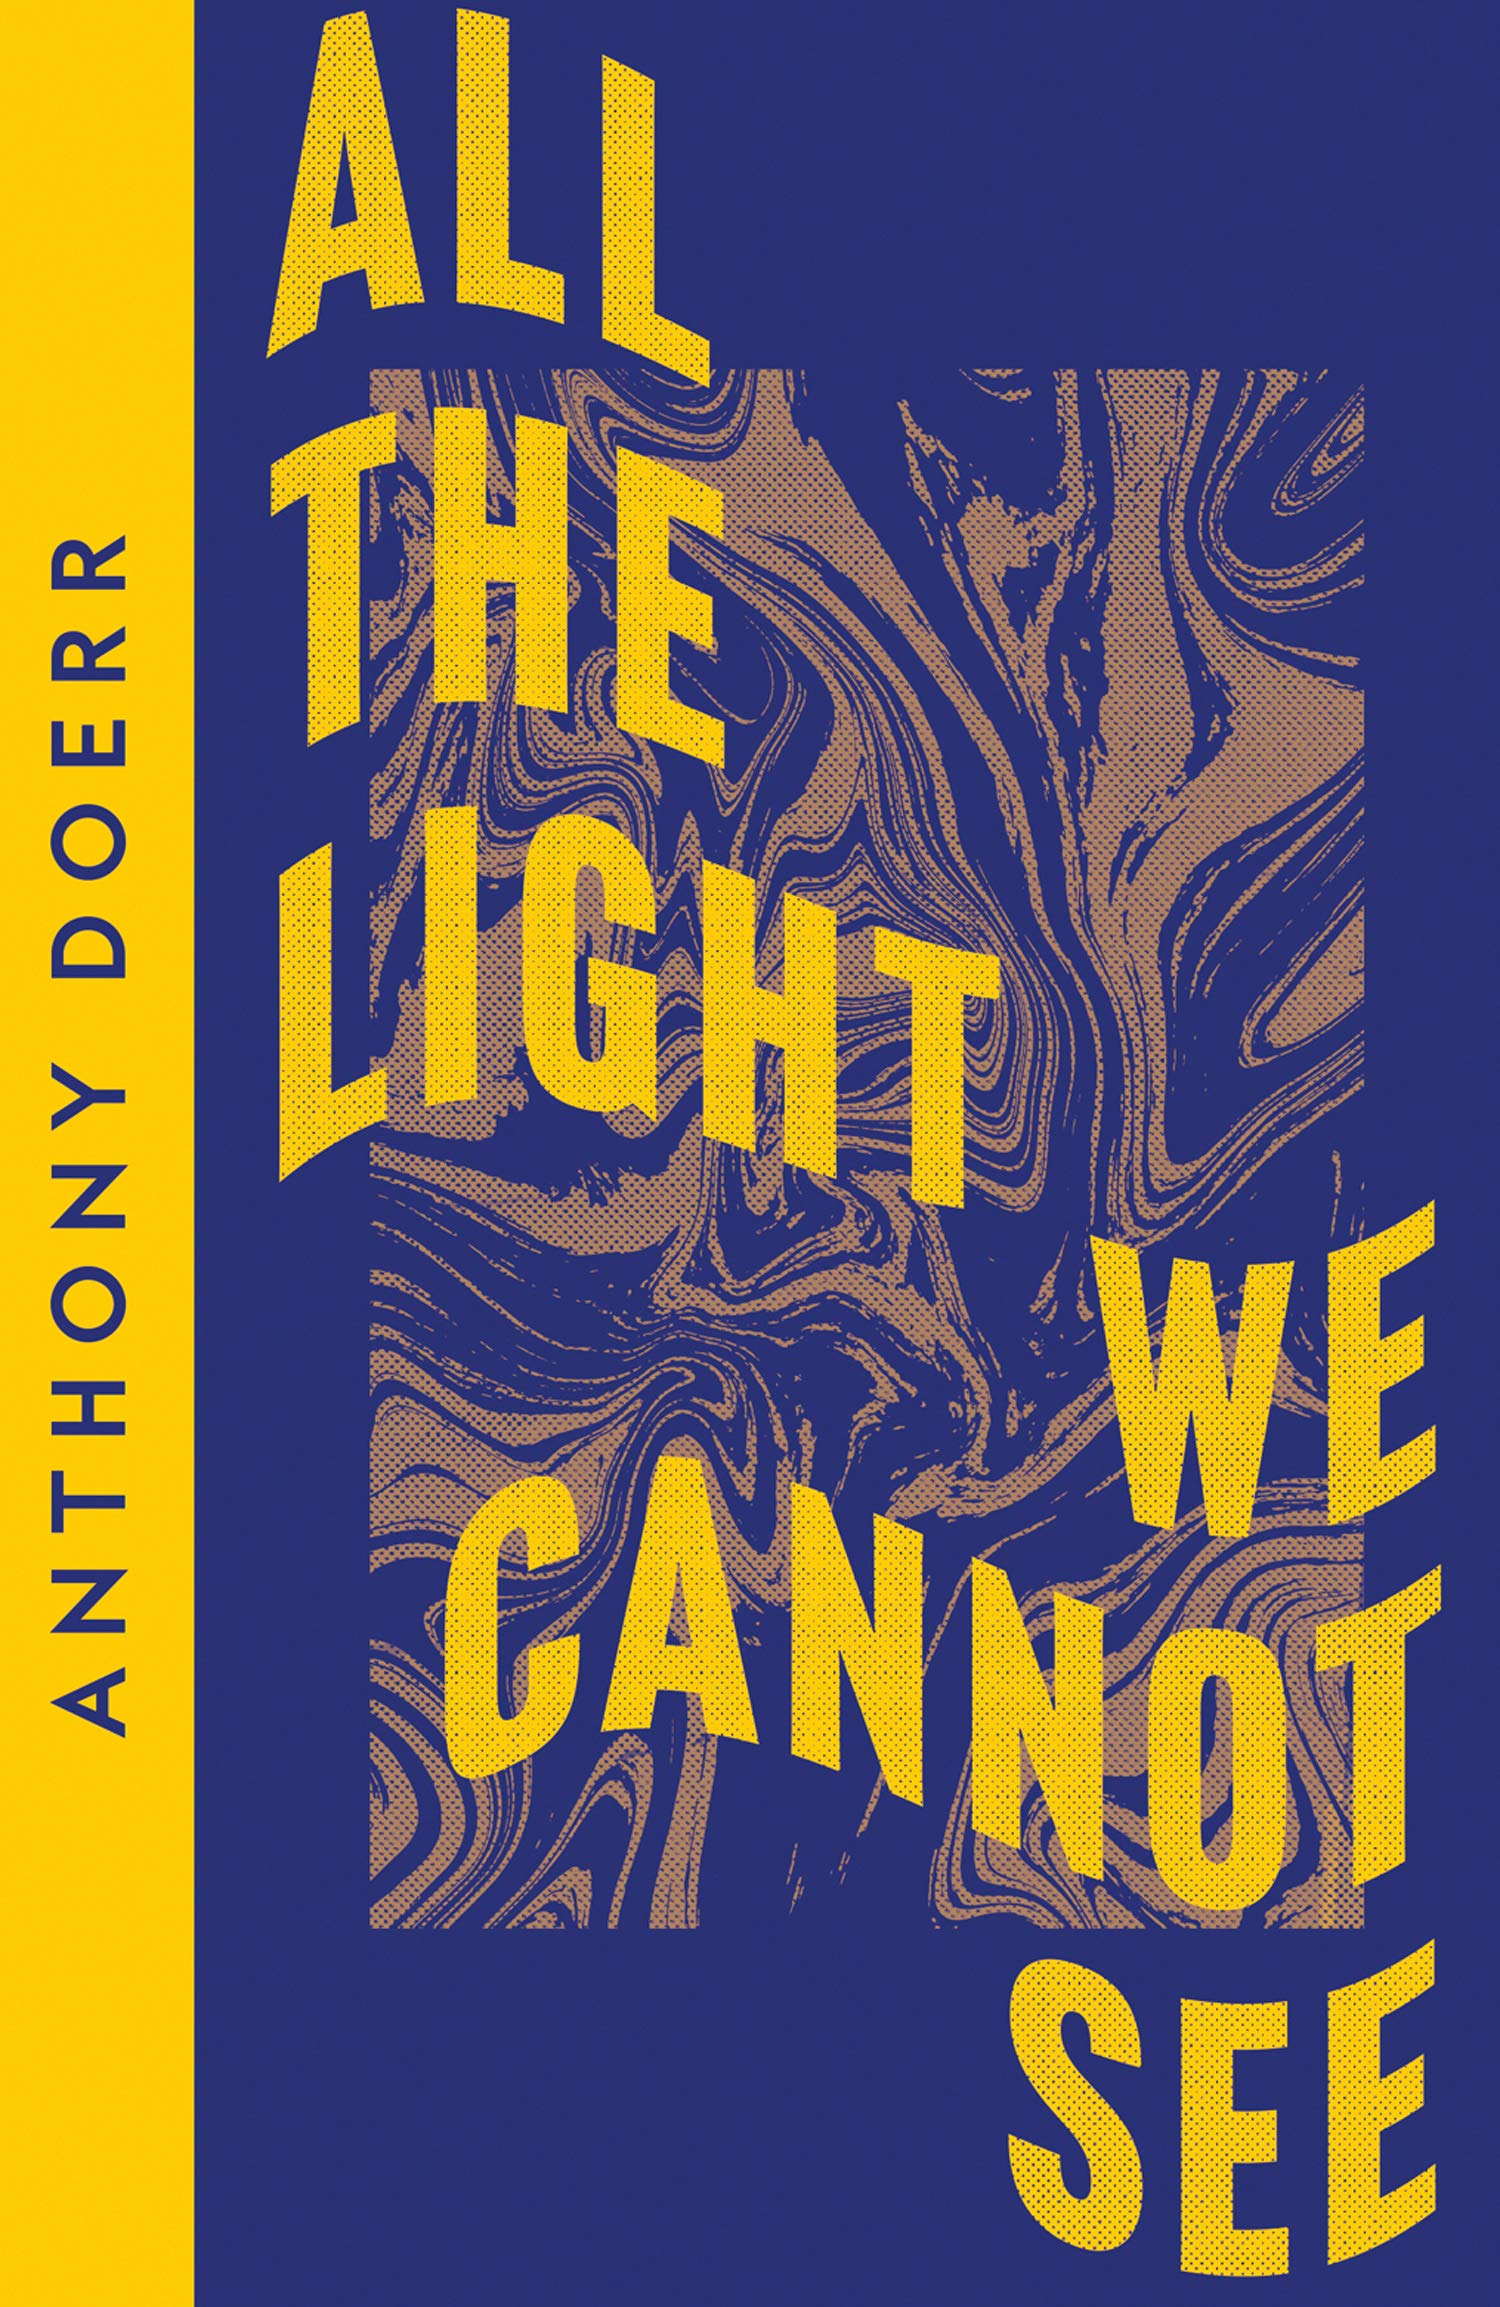 All the Light We Cannot See | Anthony Doerr